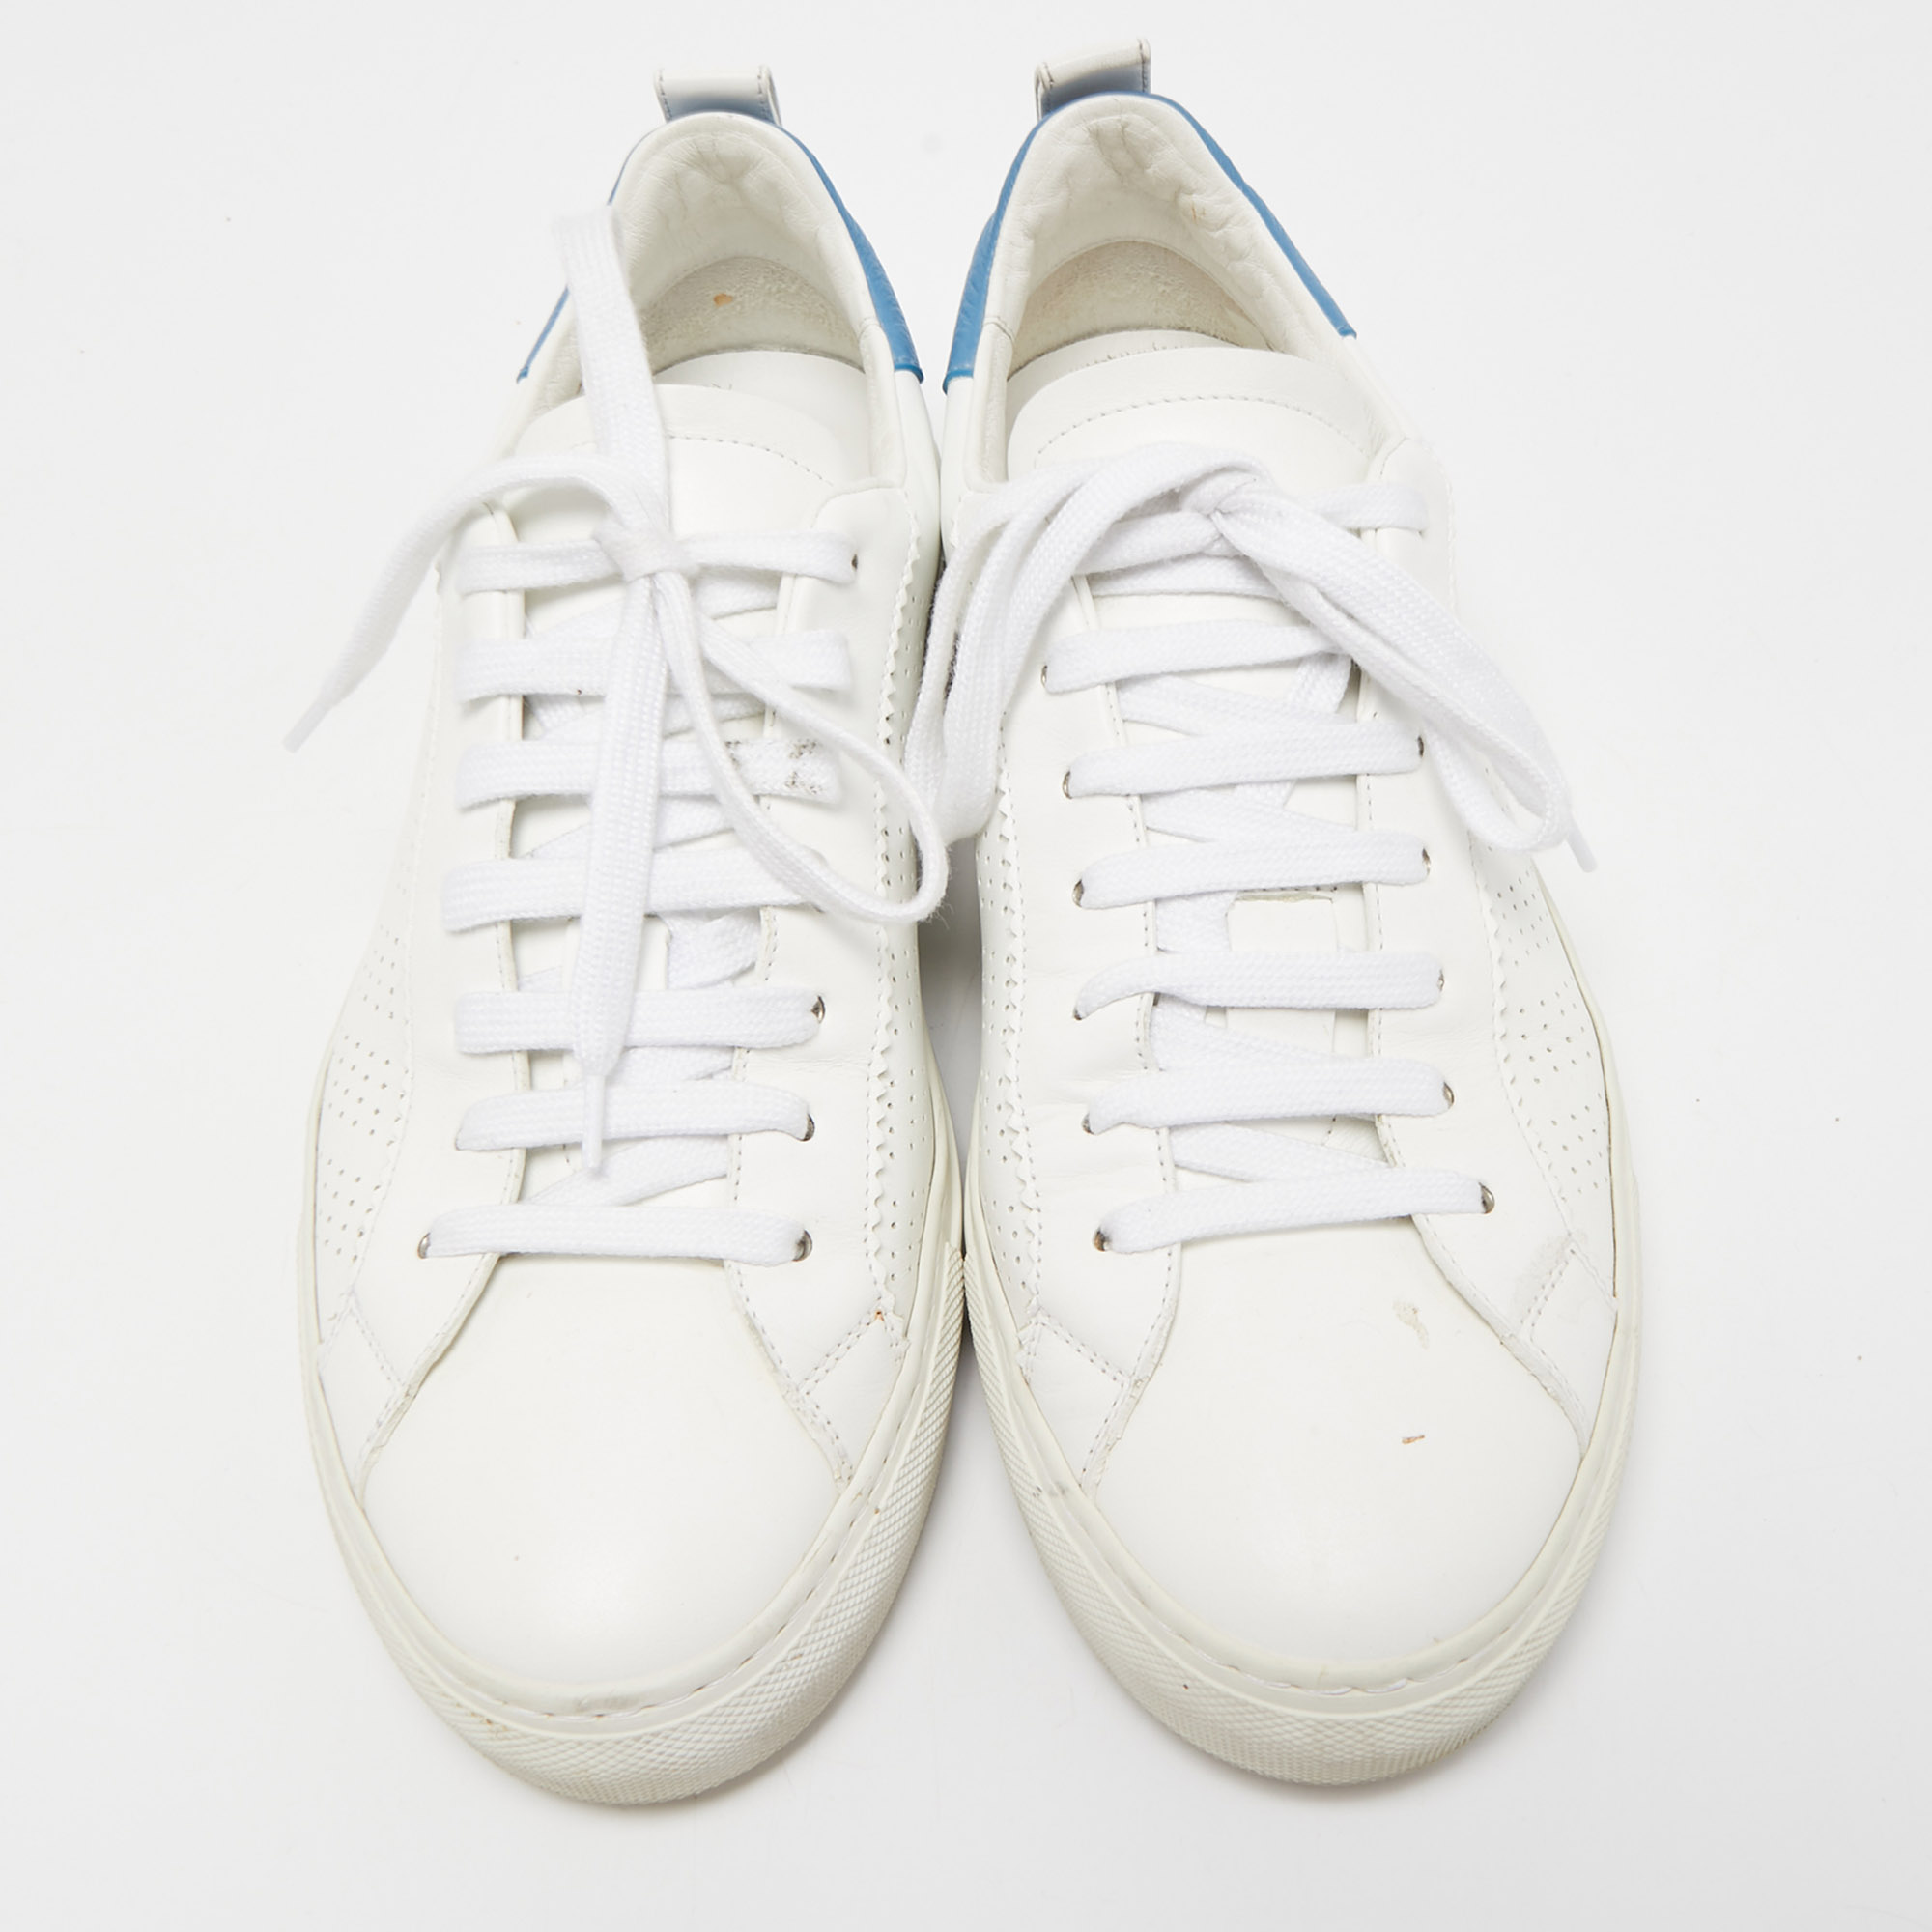 Dsquared2 White/Blue Perforated Leather Low Top Sneakers Size 41